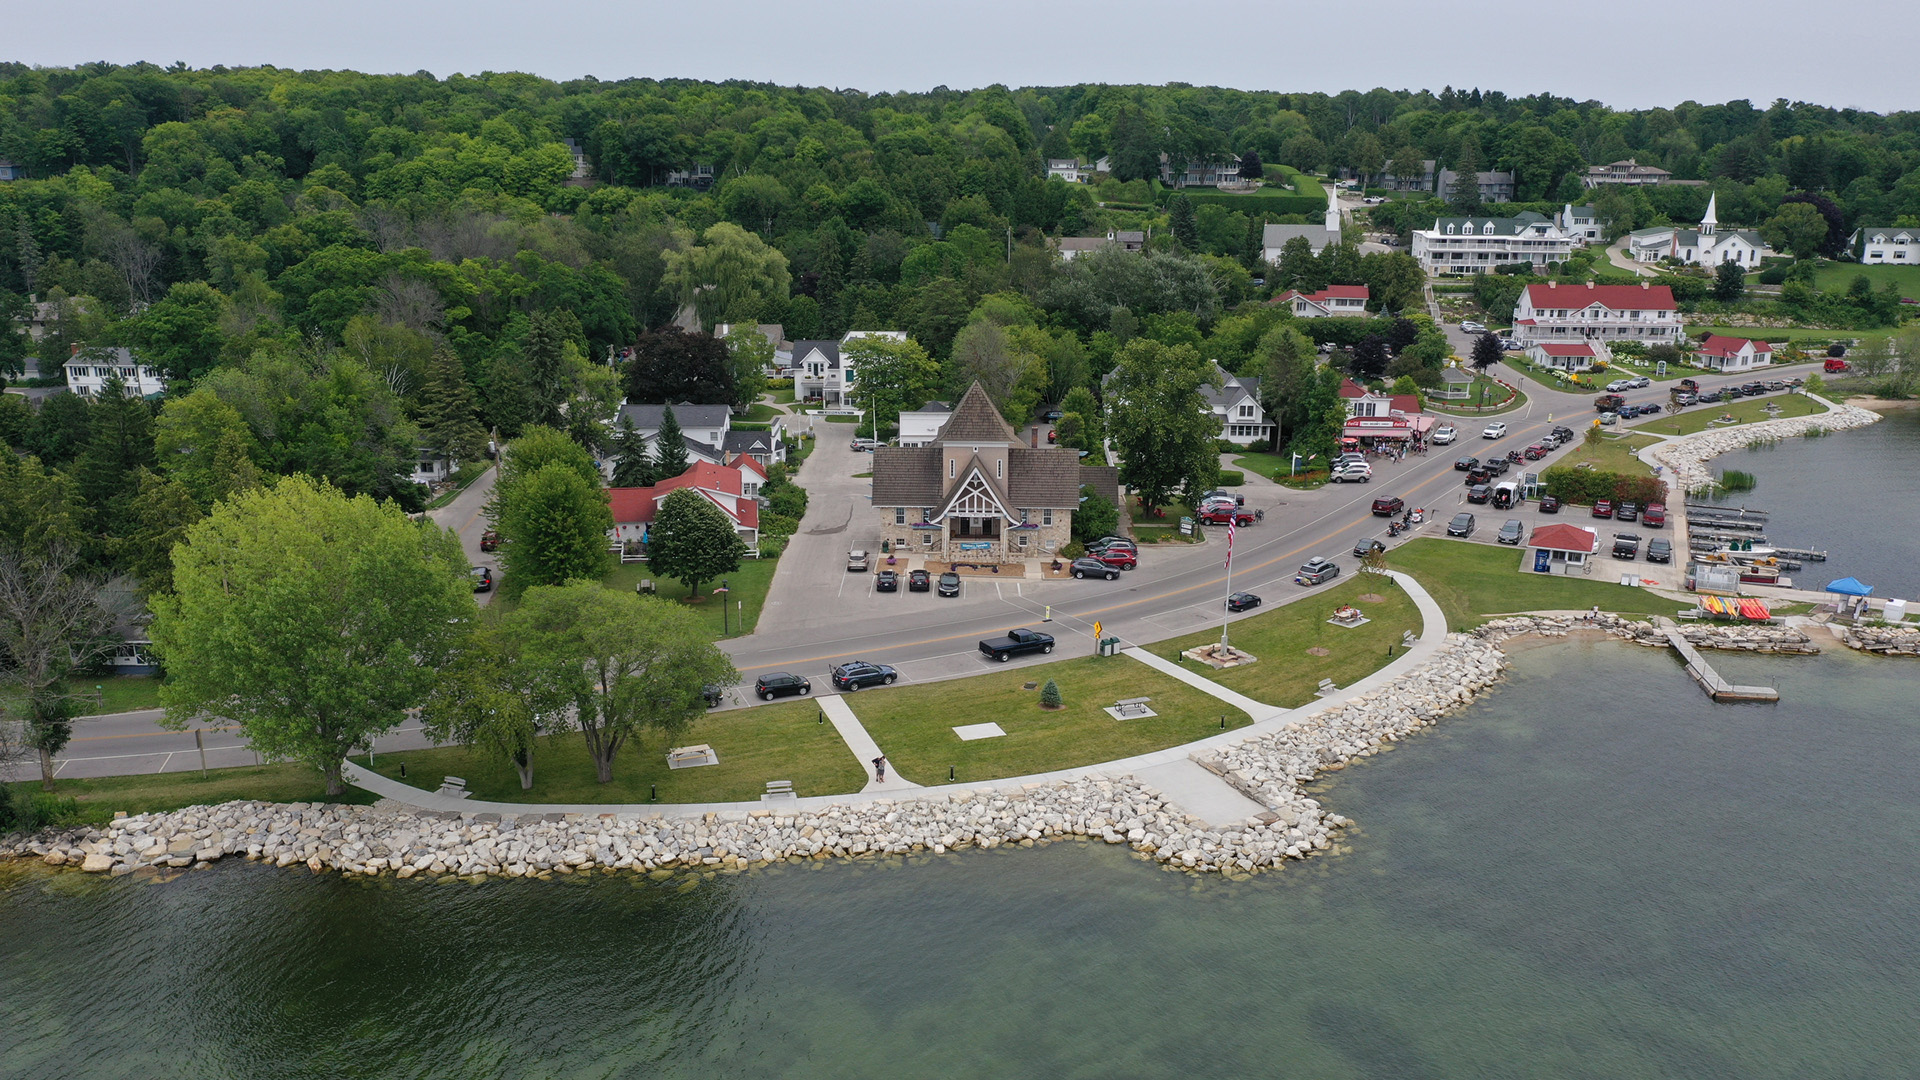 An aerial photo shows the shoreline, roads, buildings and trees.